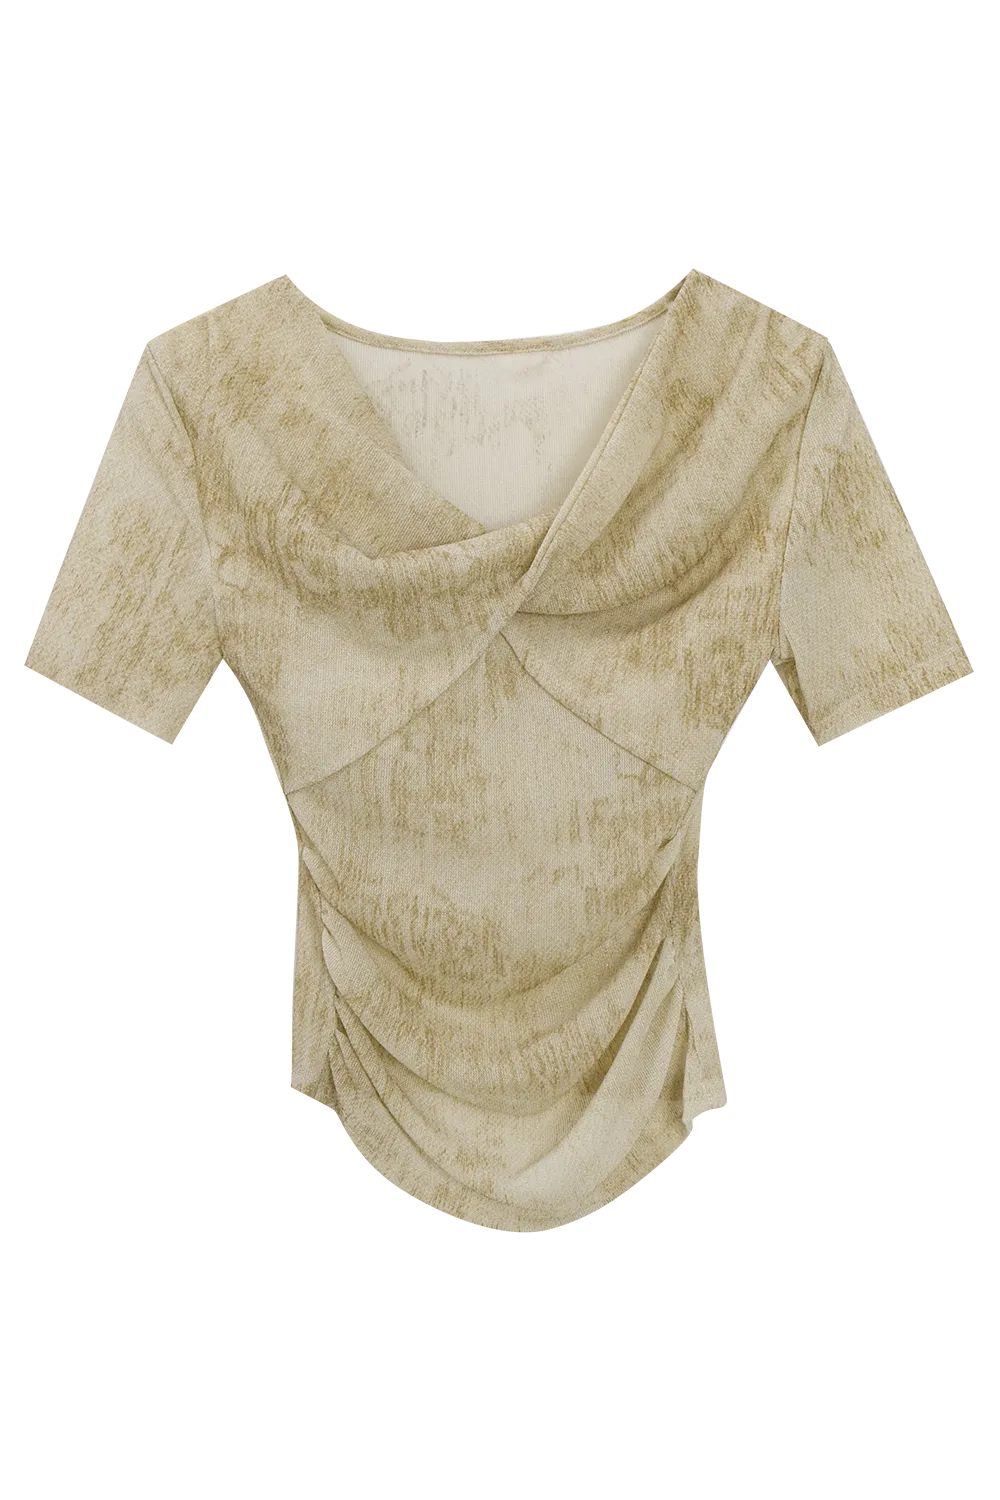 Elegant Draped Cowl Neck Top with Textured Fabric, Short Sleeve Design